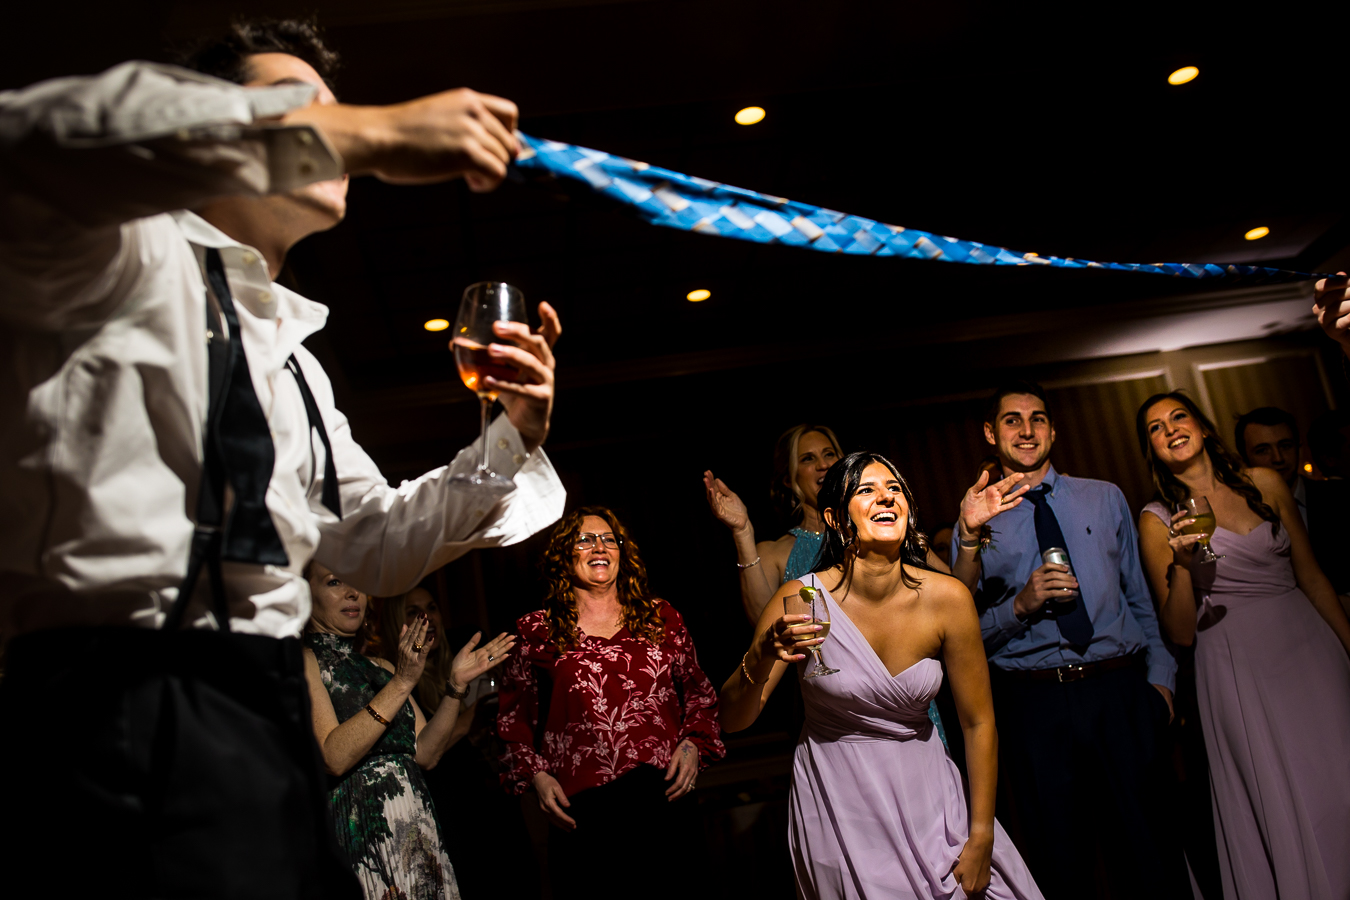 image of guests playing limbo on the dance floor with their ties